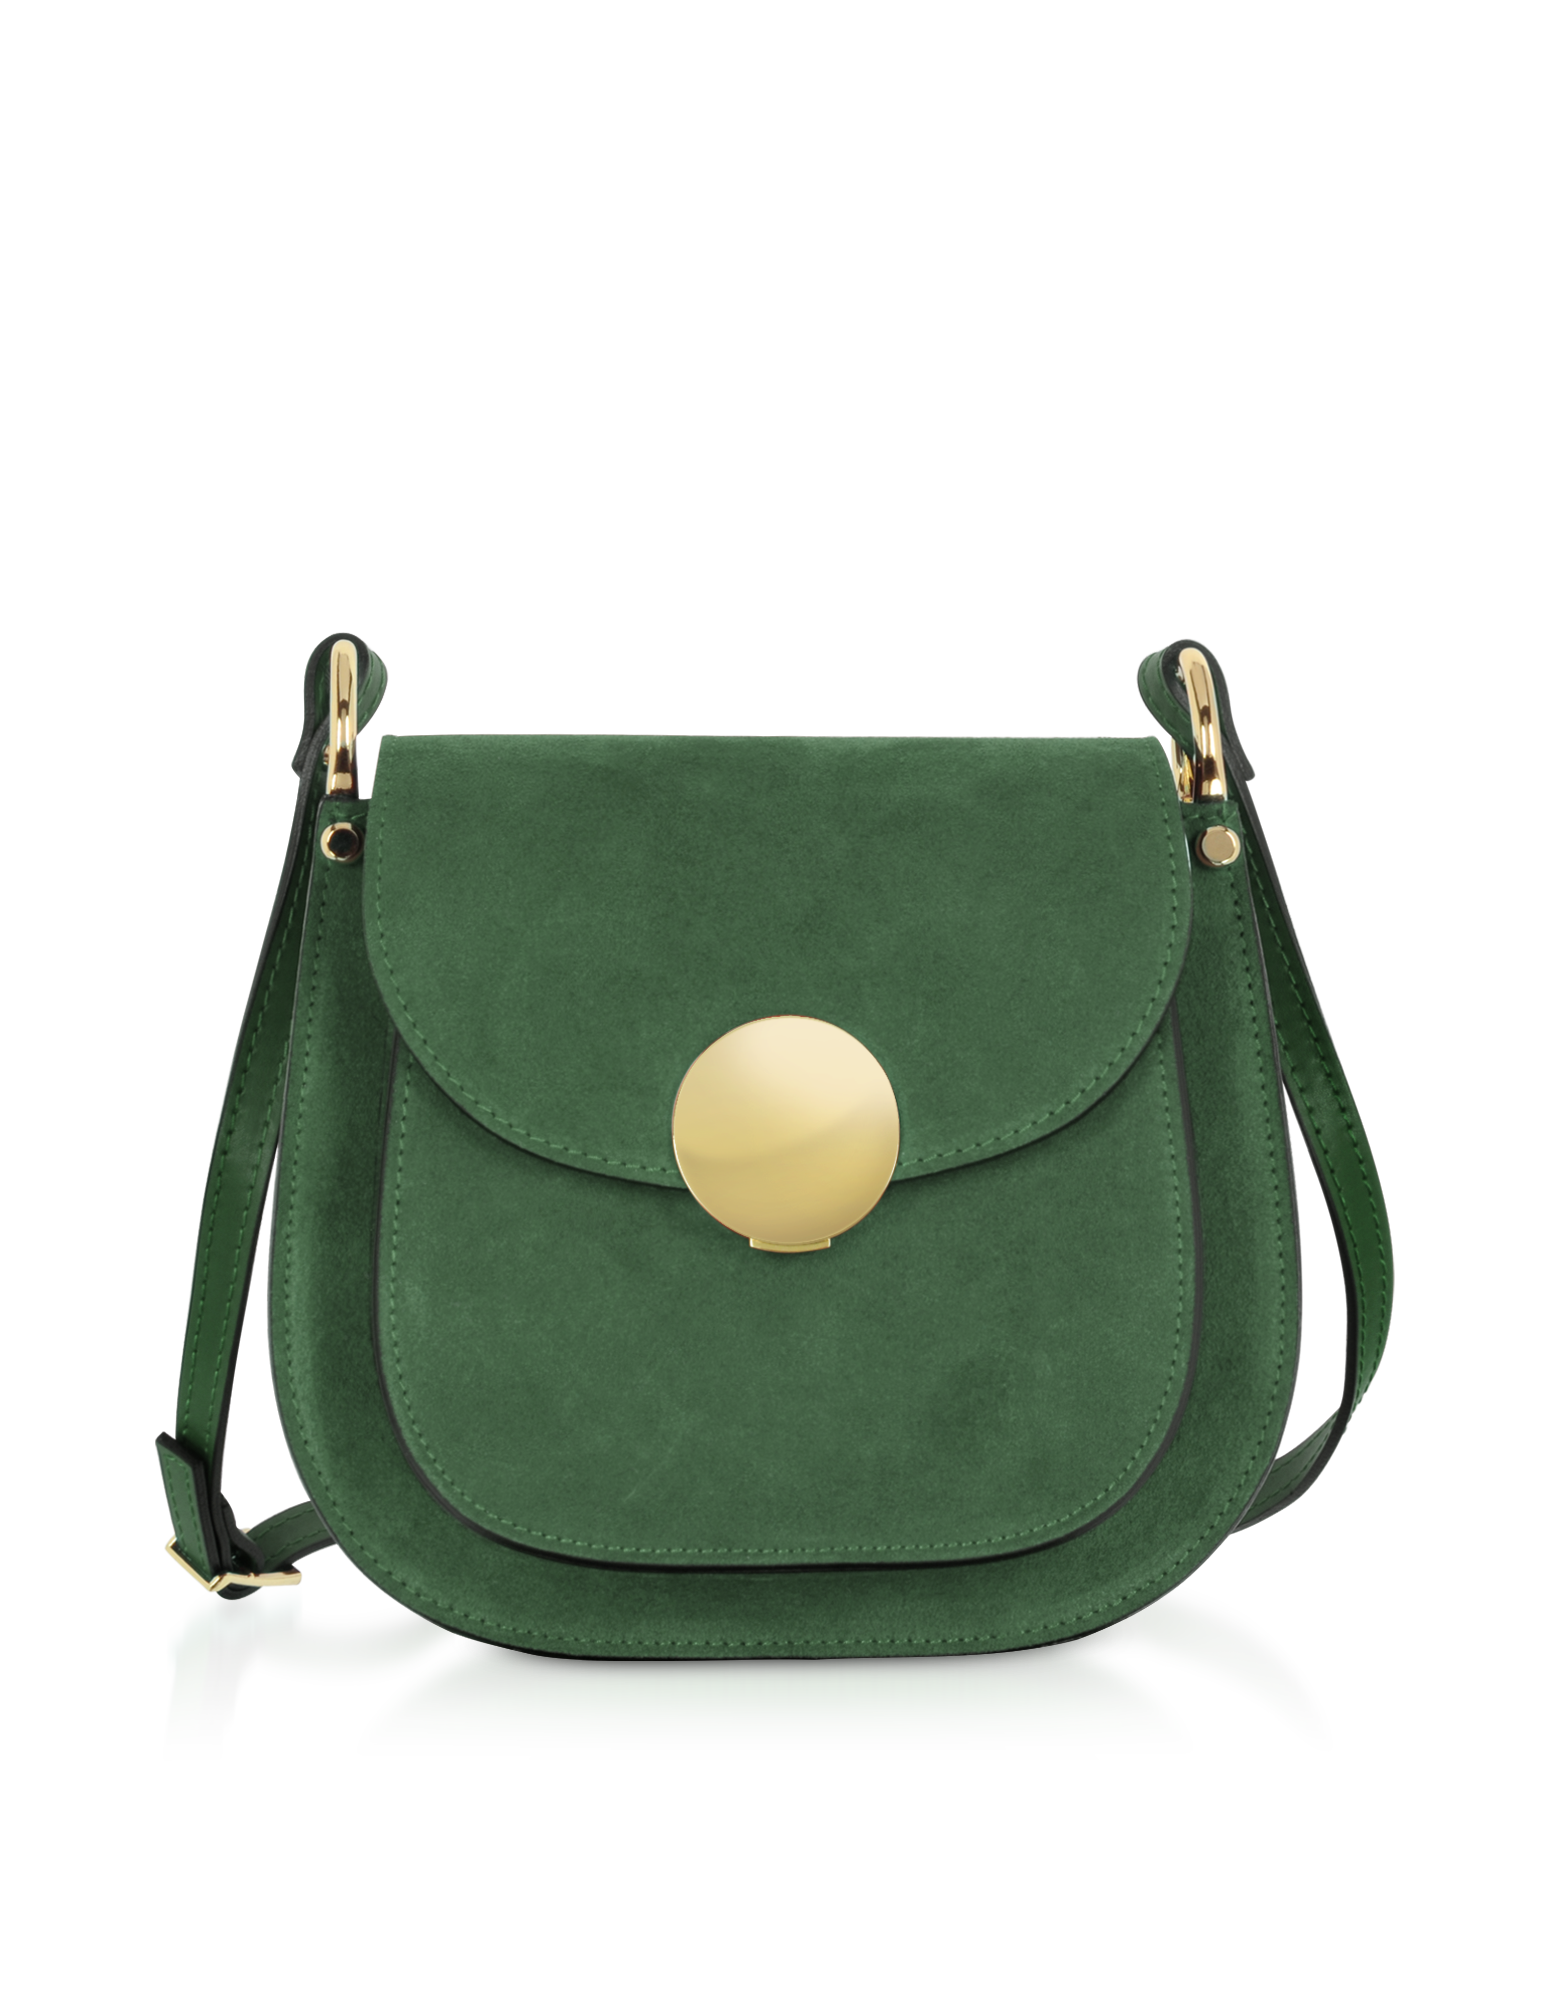 Le Parmentier Agave Luxe Saddle Bag in Italian Calf Leather